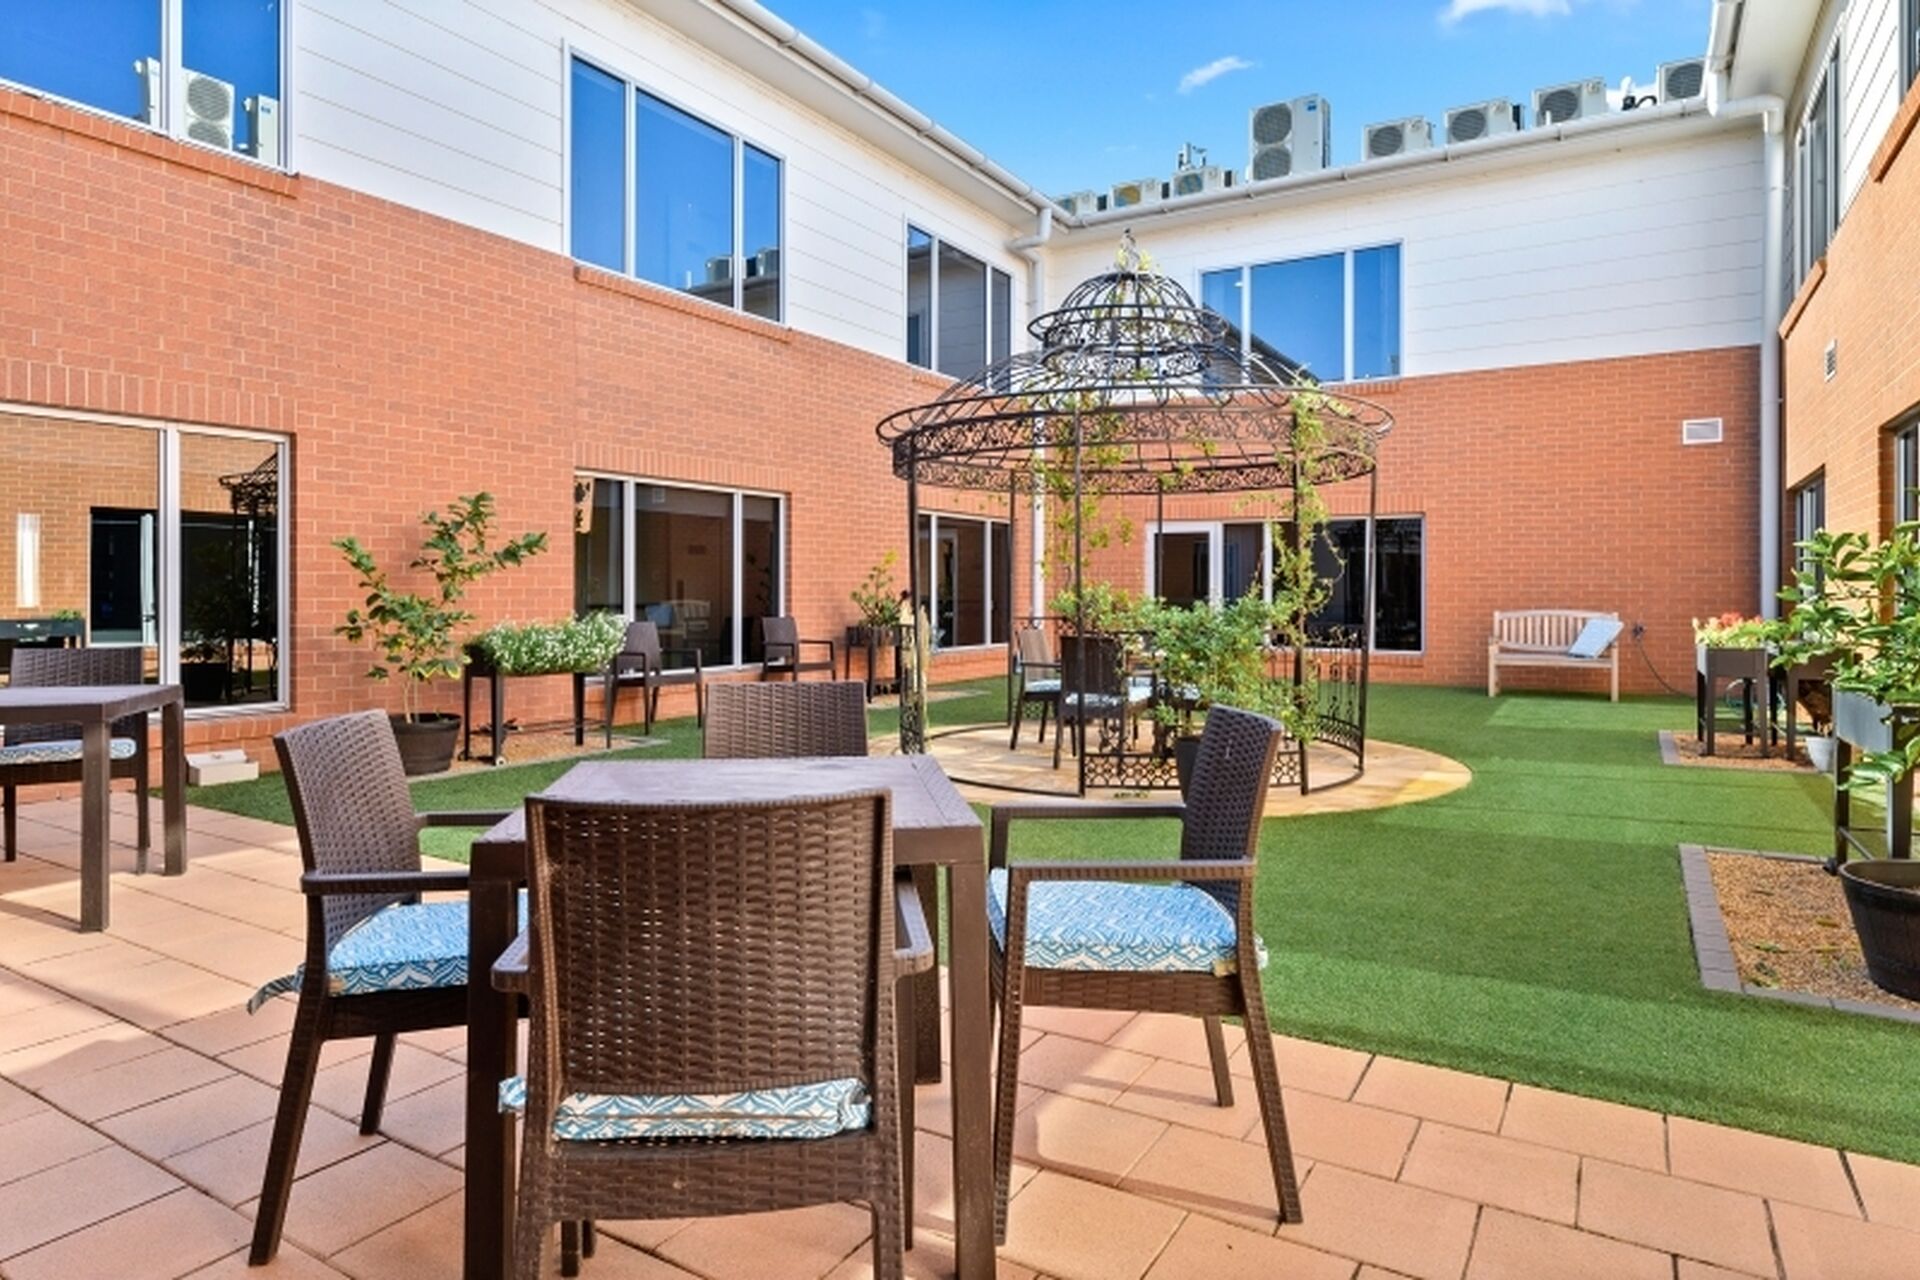 communal outdoor courtyard for nursing home residents at baptistcare kintyre lodge aged care home in dubbo